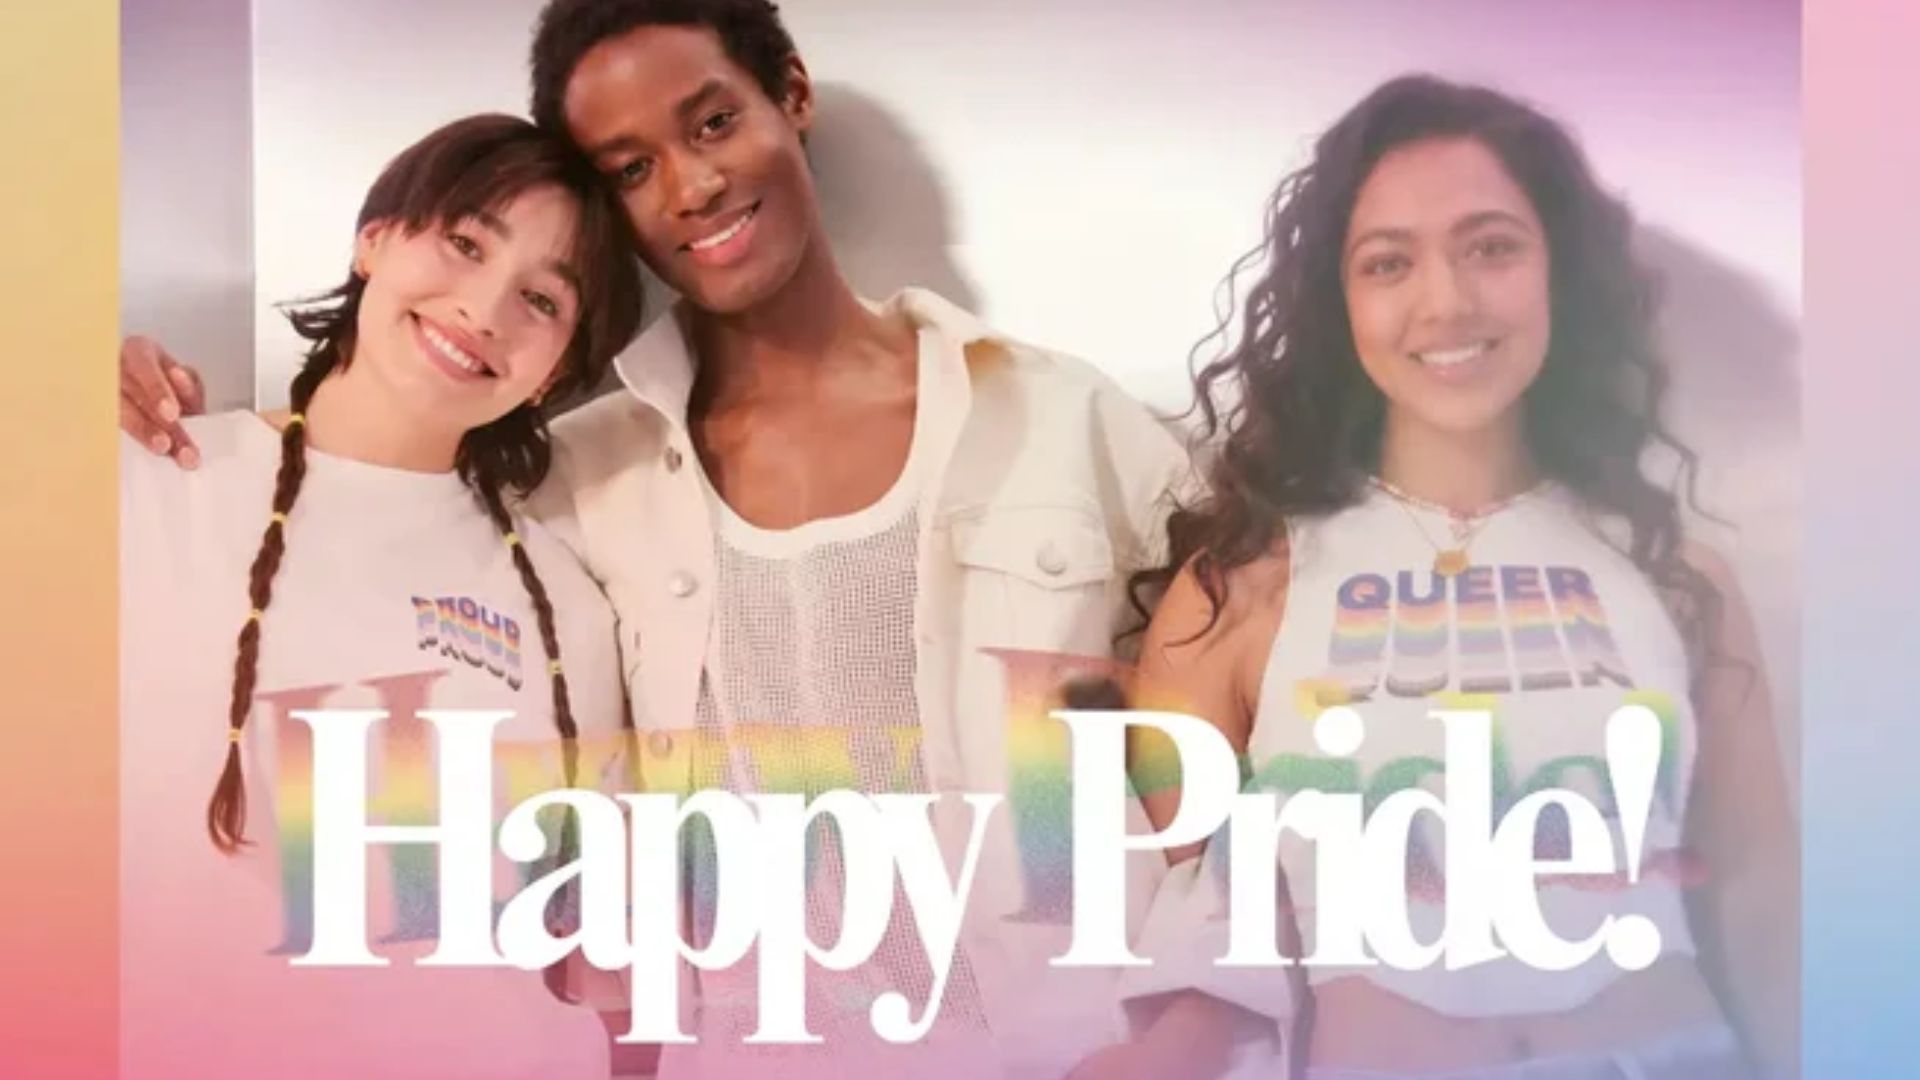 Why pride month marketing is quieter this year—and how brands can avoid backlash